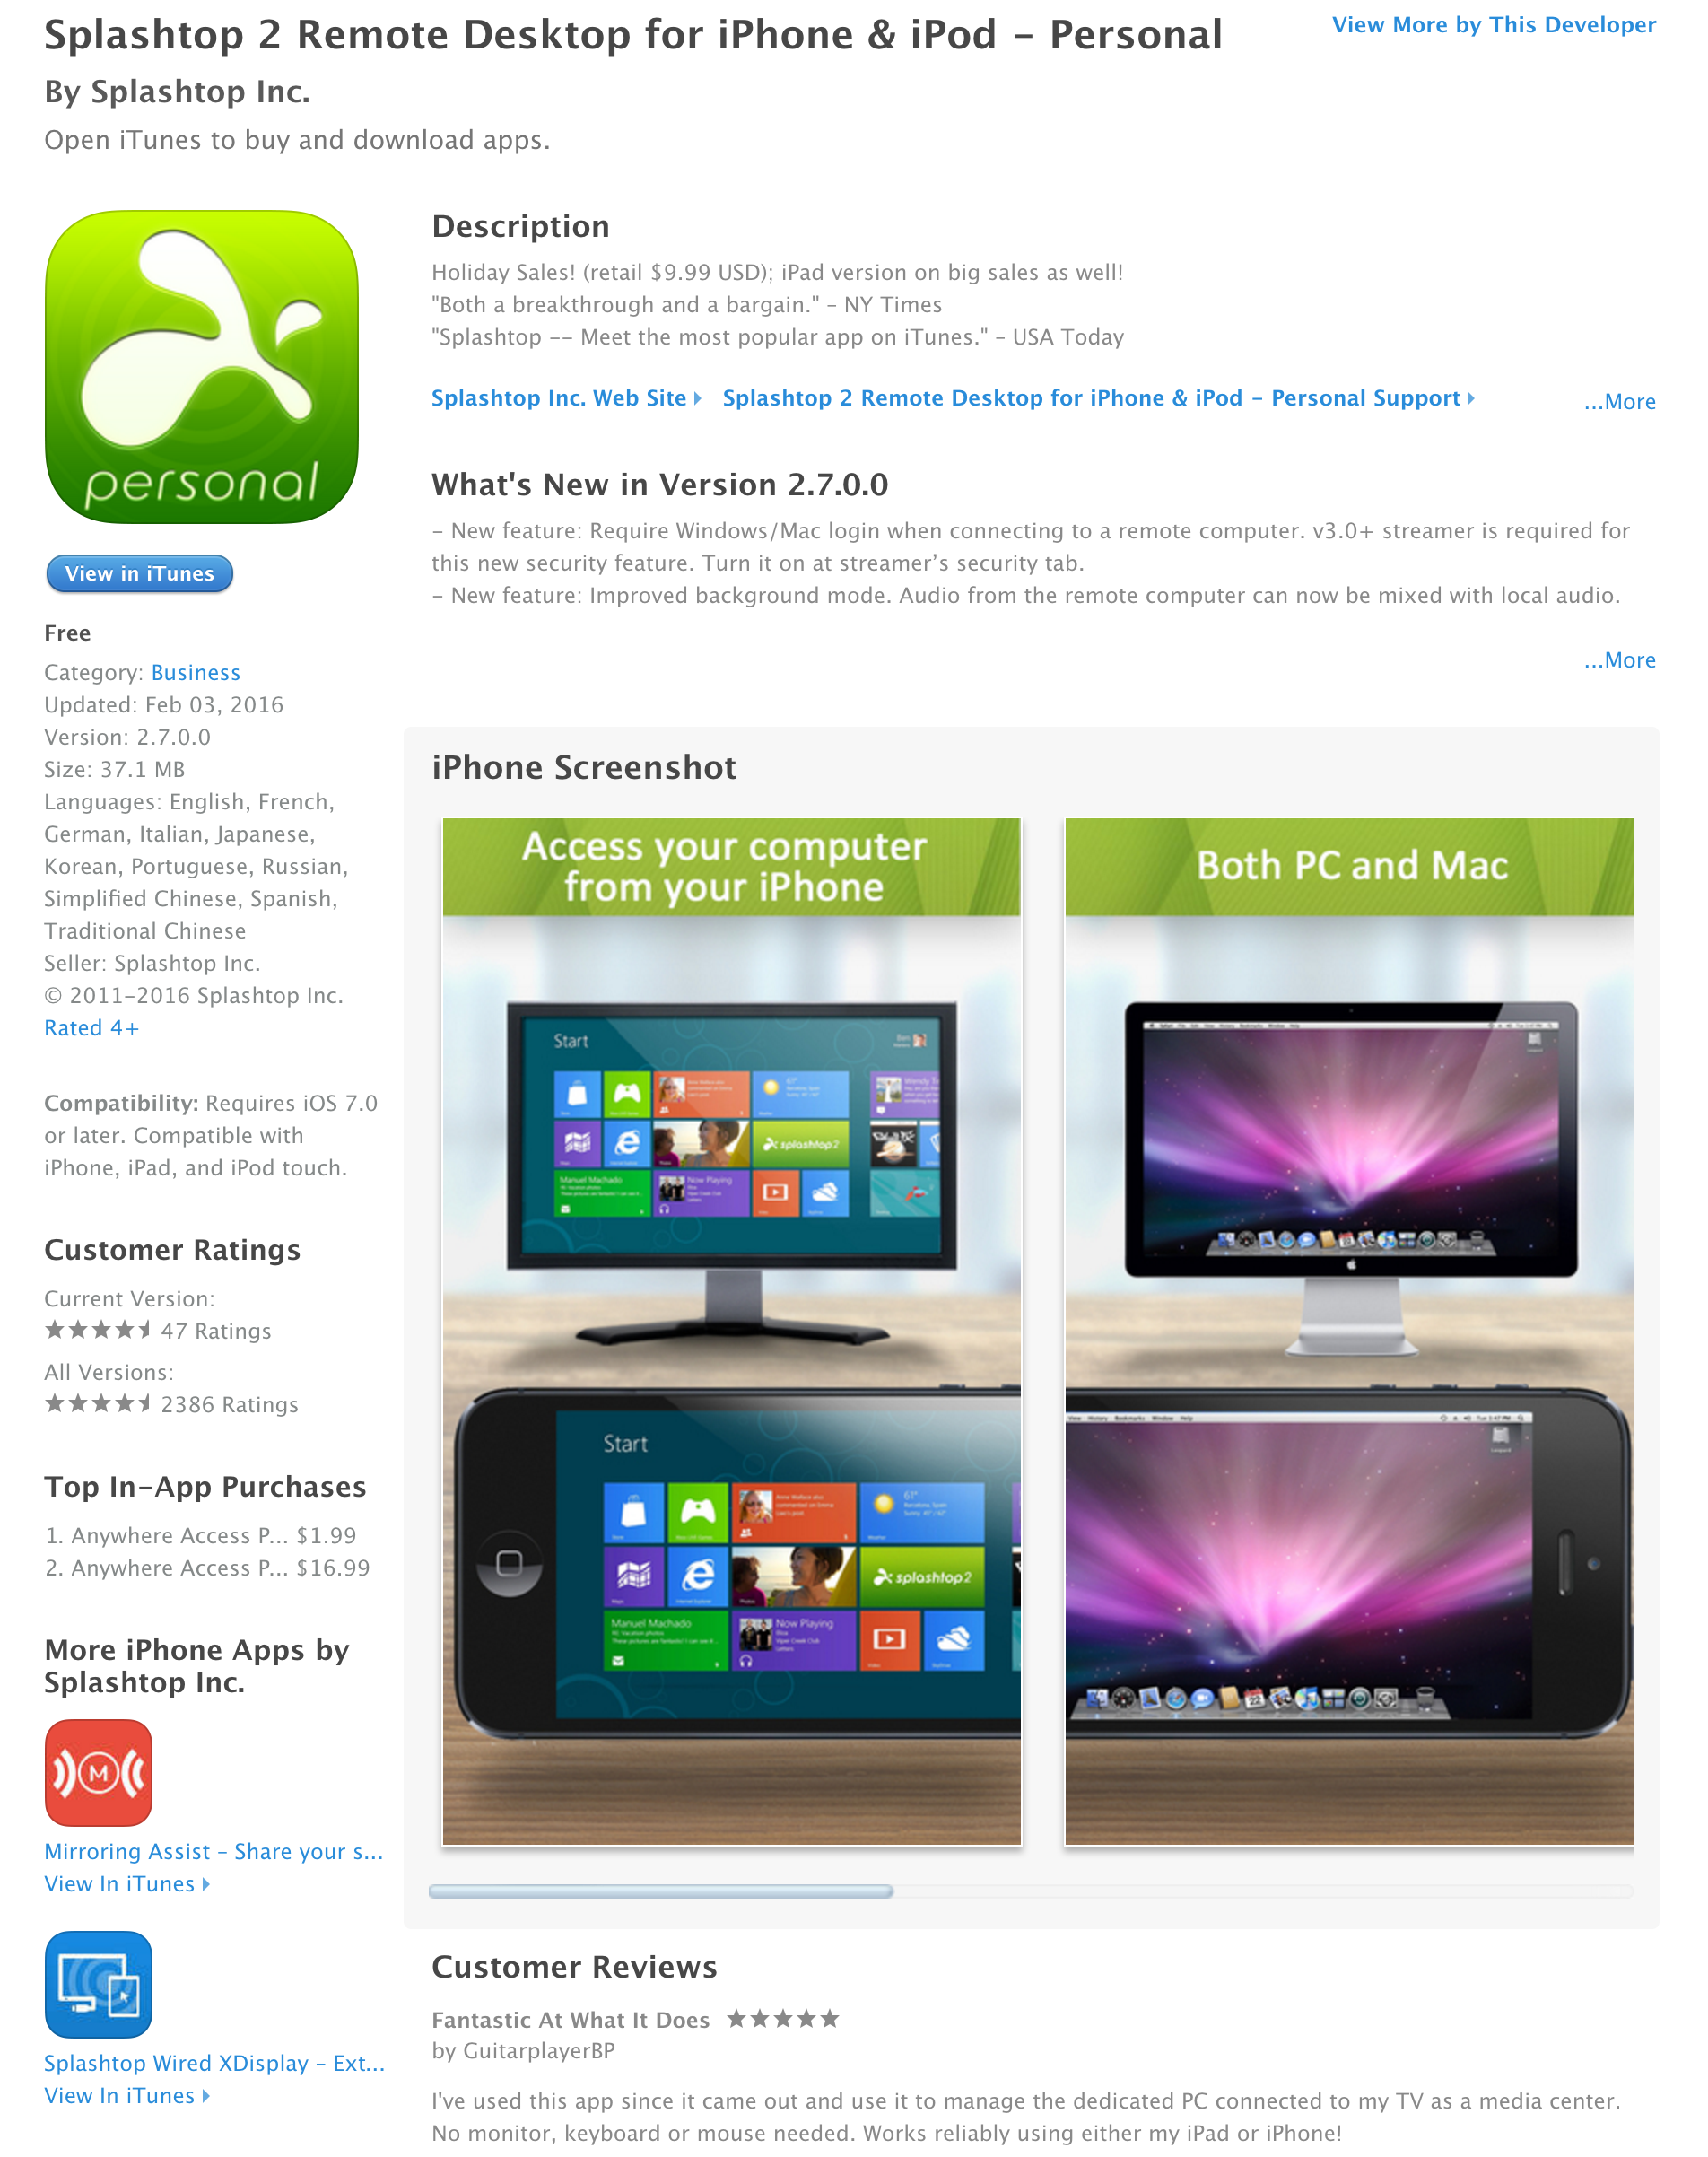 splashtop 2 anywhere access pack free android